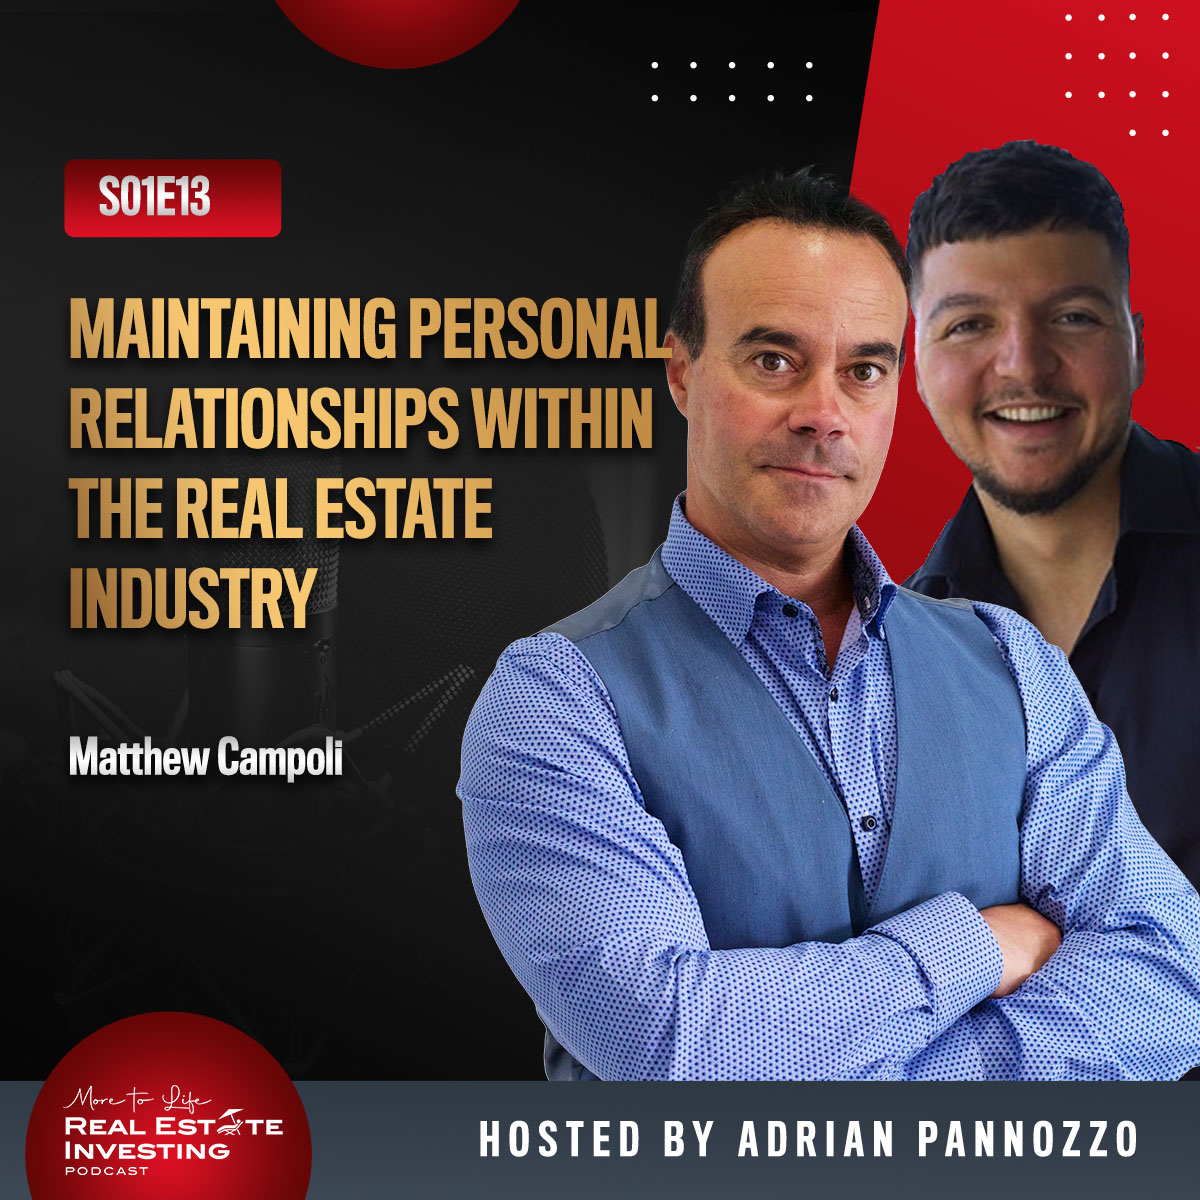  Maintaining Personal Relationships Within the Real Estate Industry with Matthew Campoli